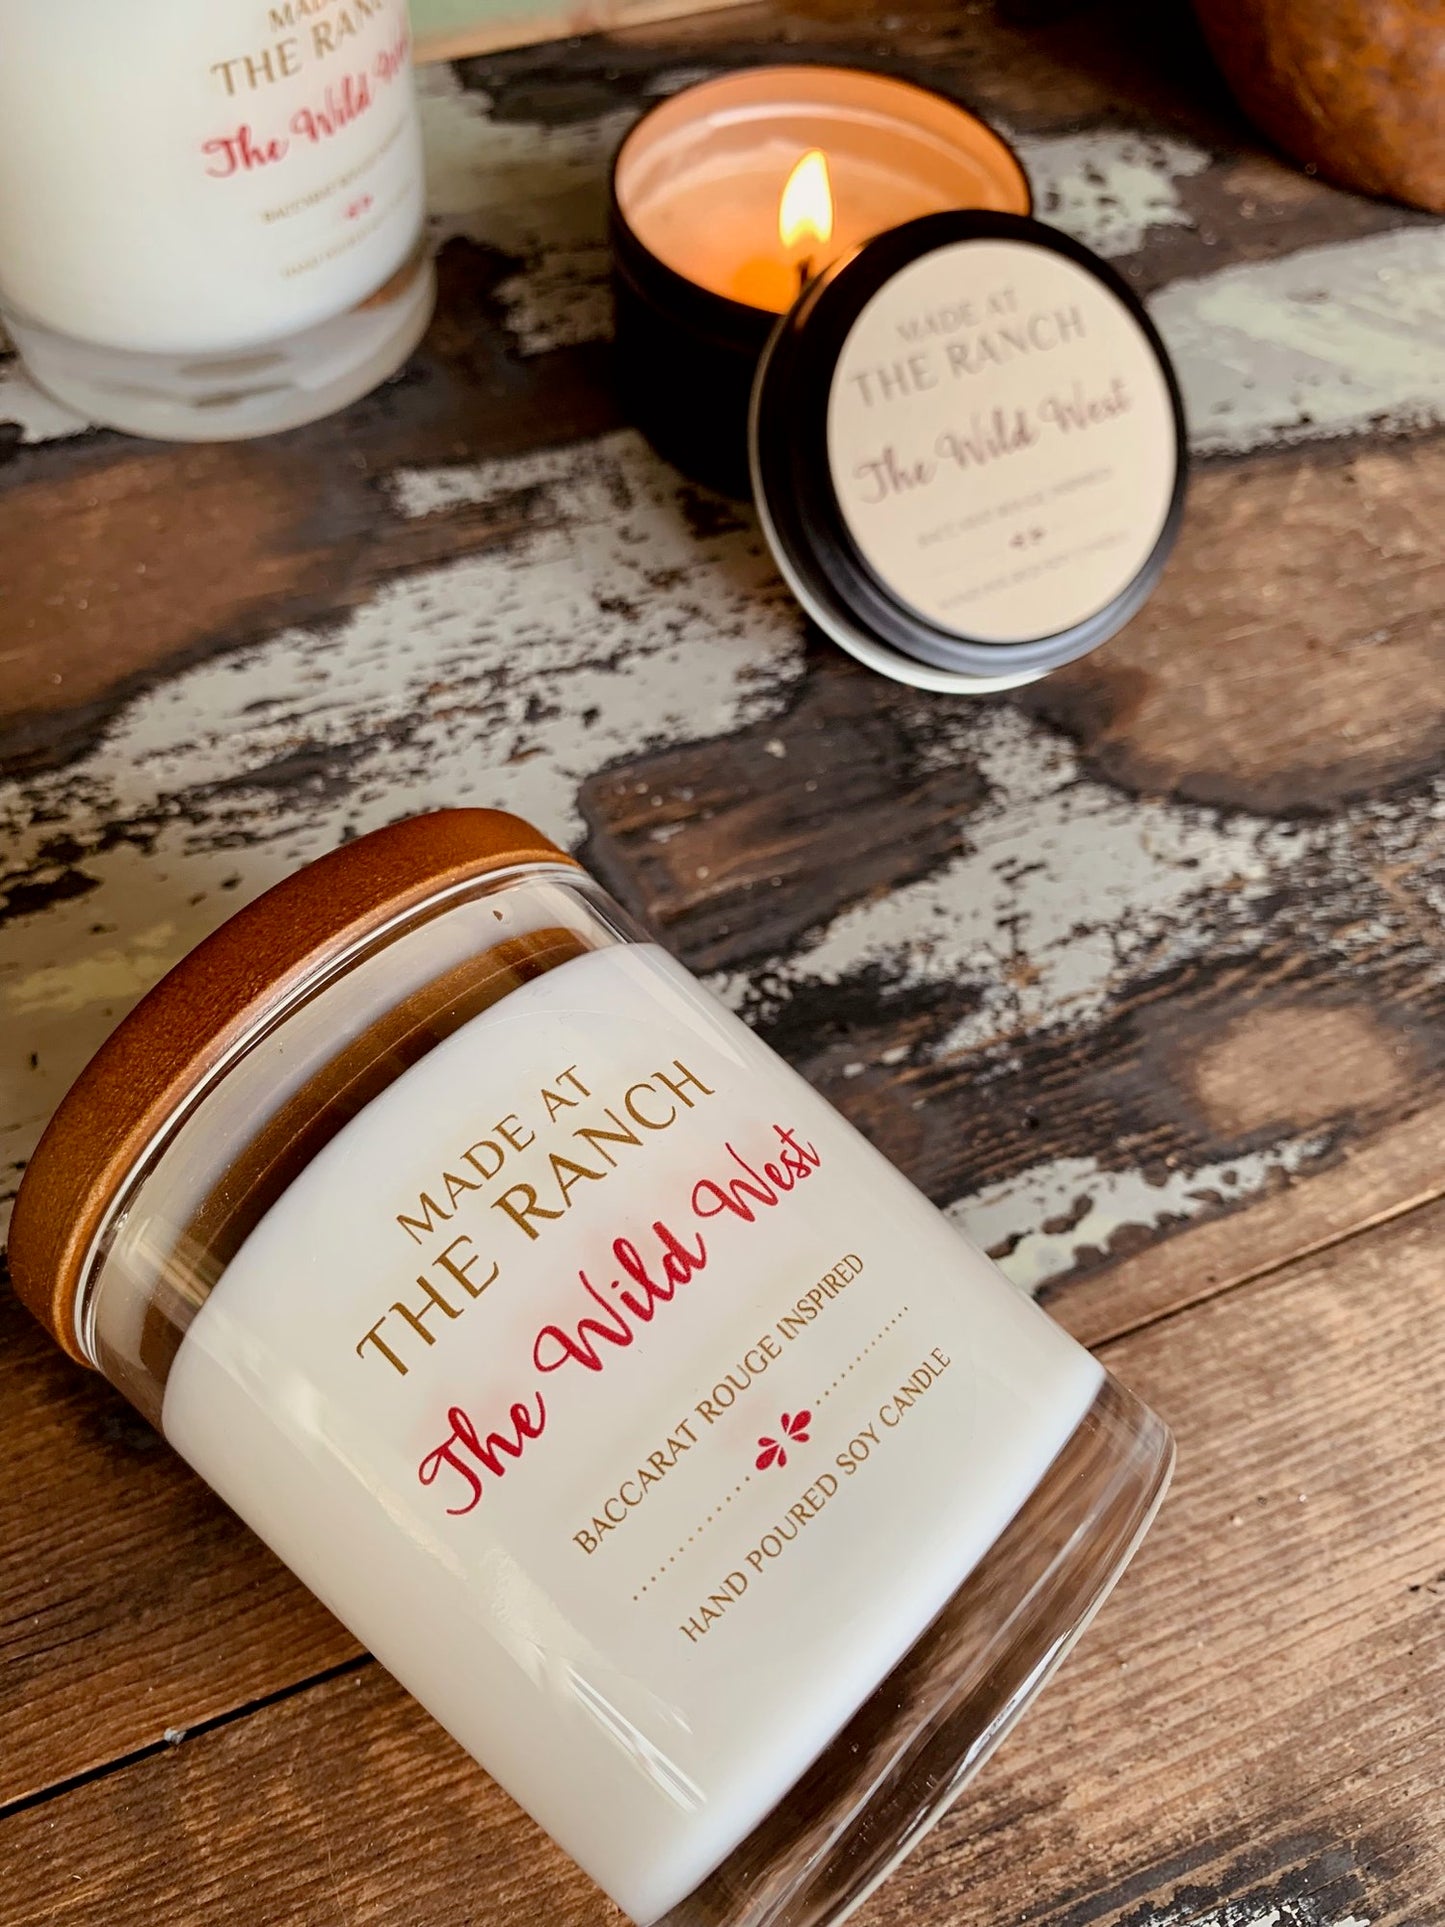 Made At The Ranch Soy Scent Sampler Candle - The Wild West